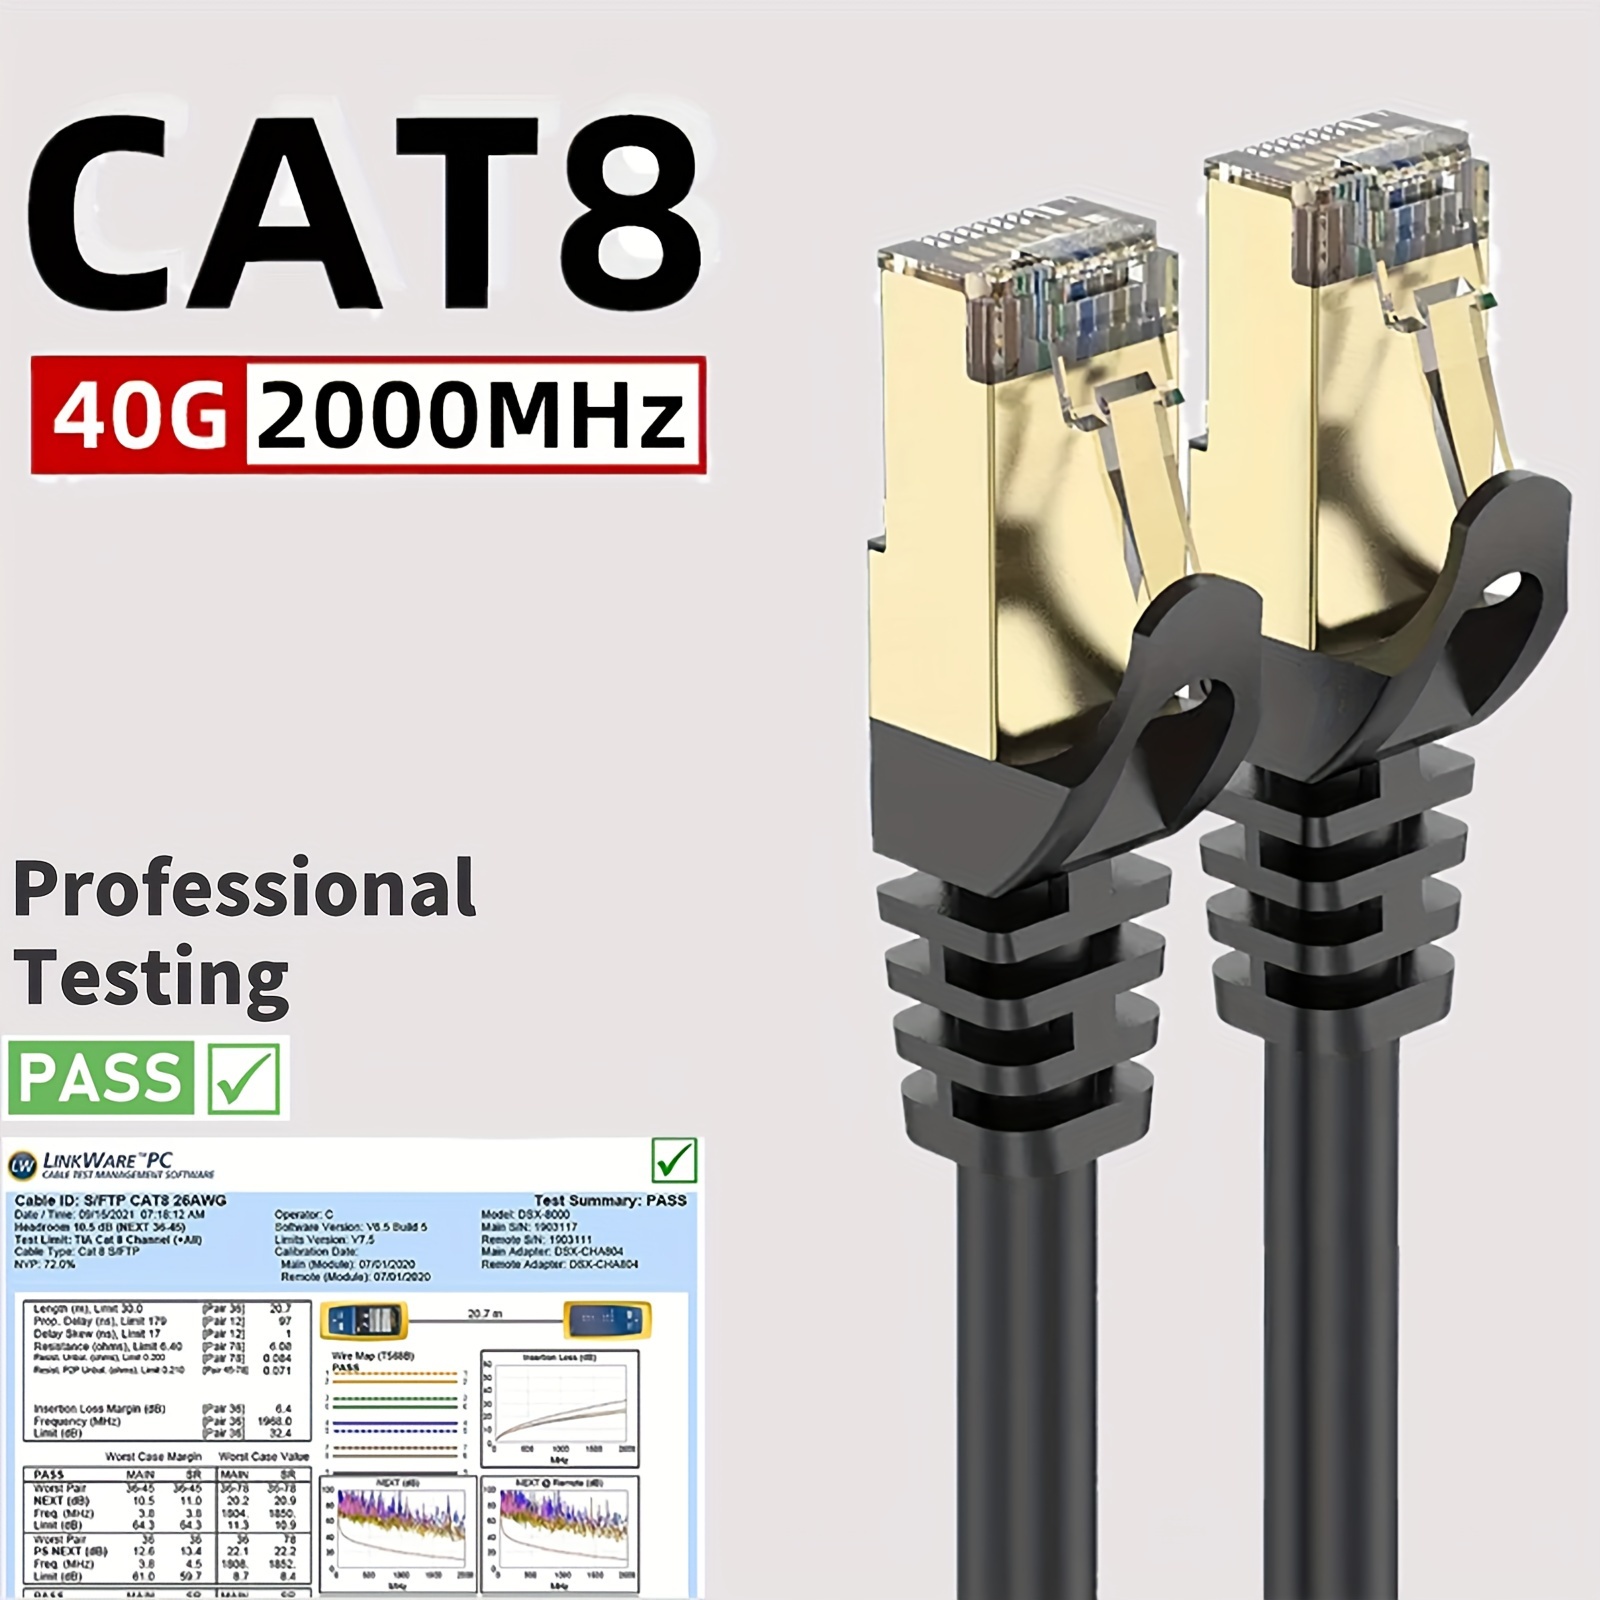 Cable RJ45 Ethernet Cat 8 40Gbps 2m High Speed SFTP Vention